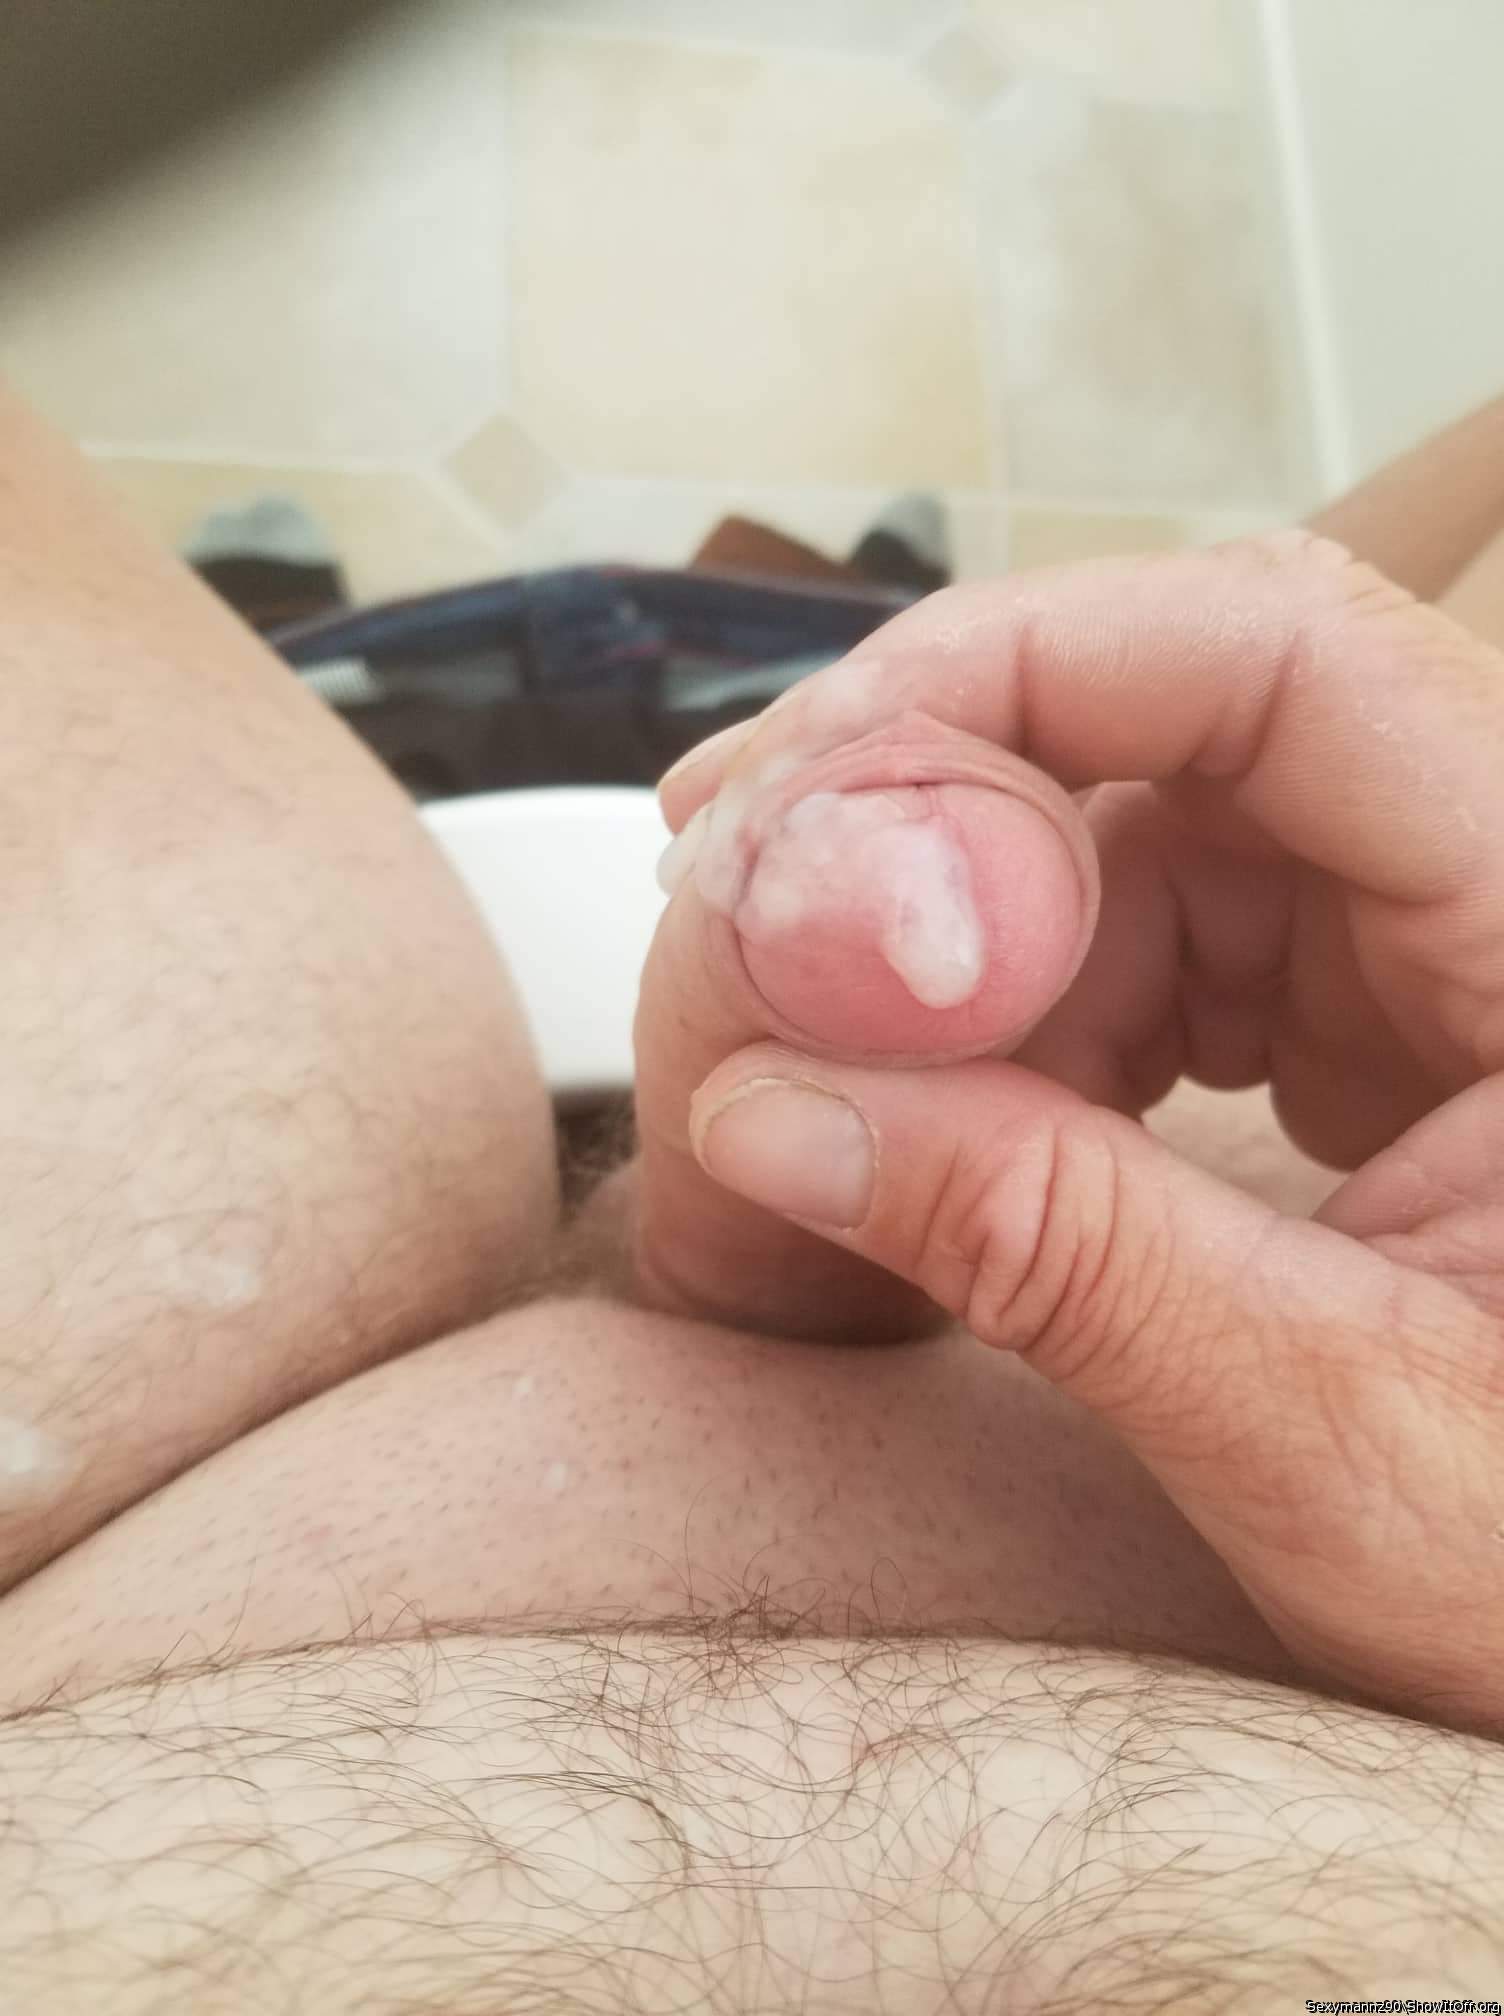 Photo of a weasel from Sexymannz90